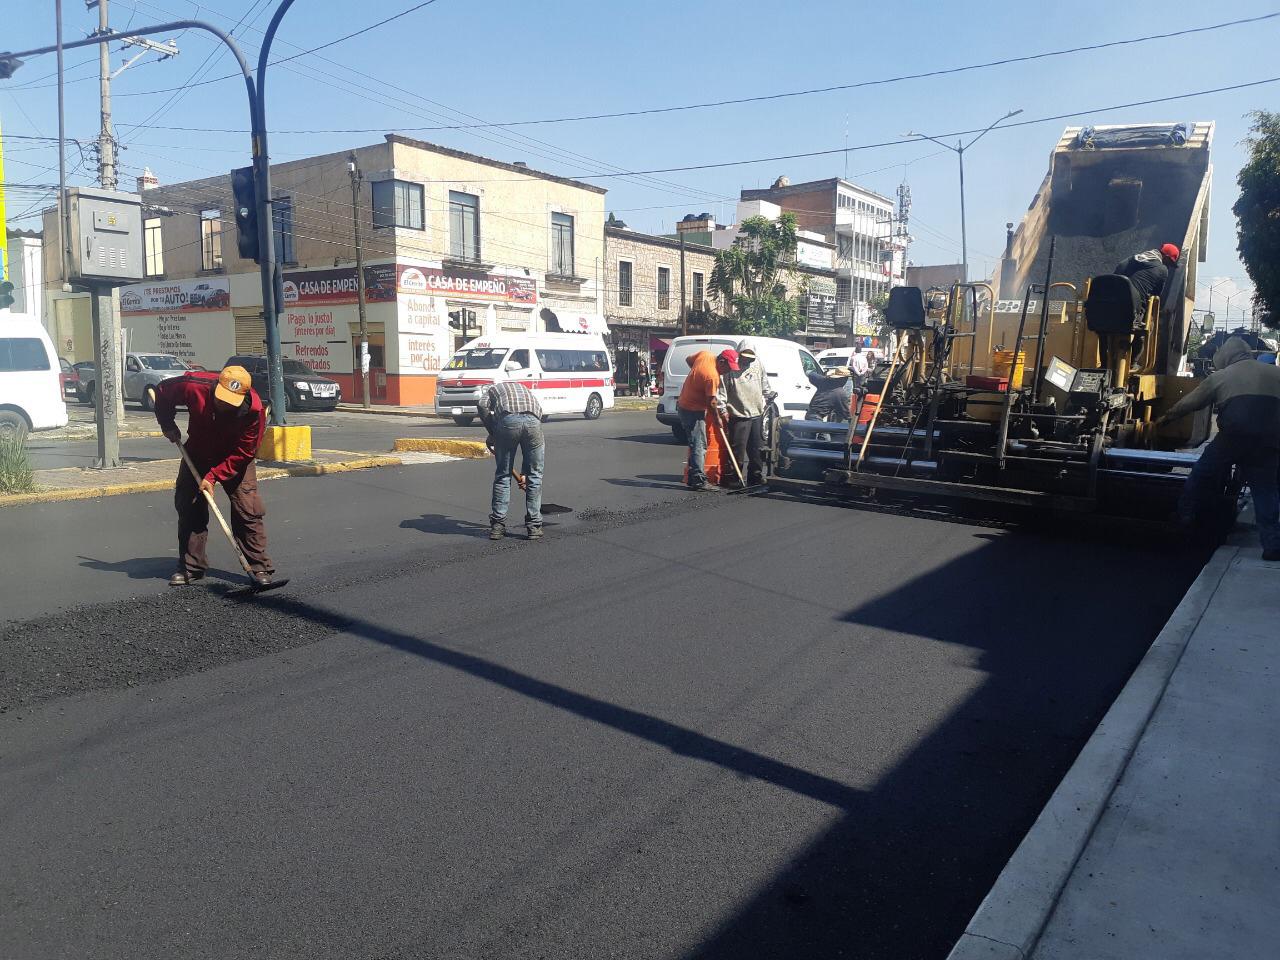 The Government of Morelia announces the re-enfolderment on Madero Avenue, between Journalismo and Calzada La Huerta